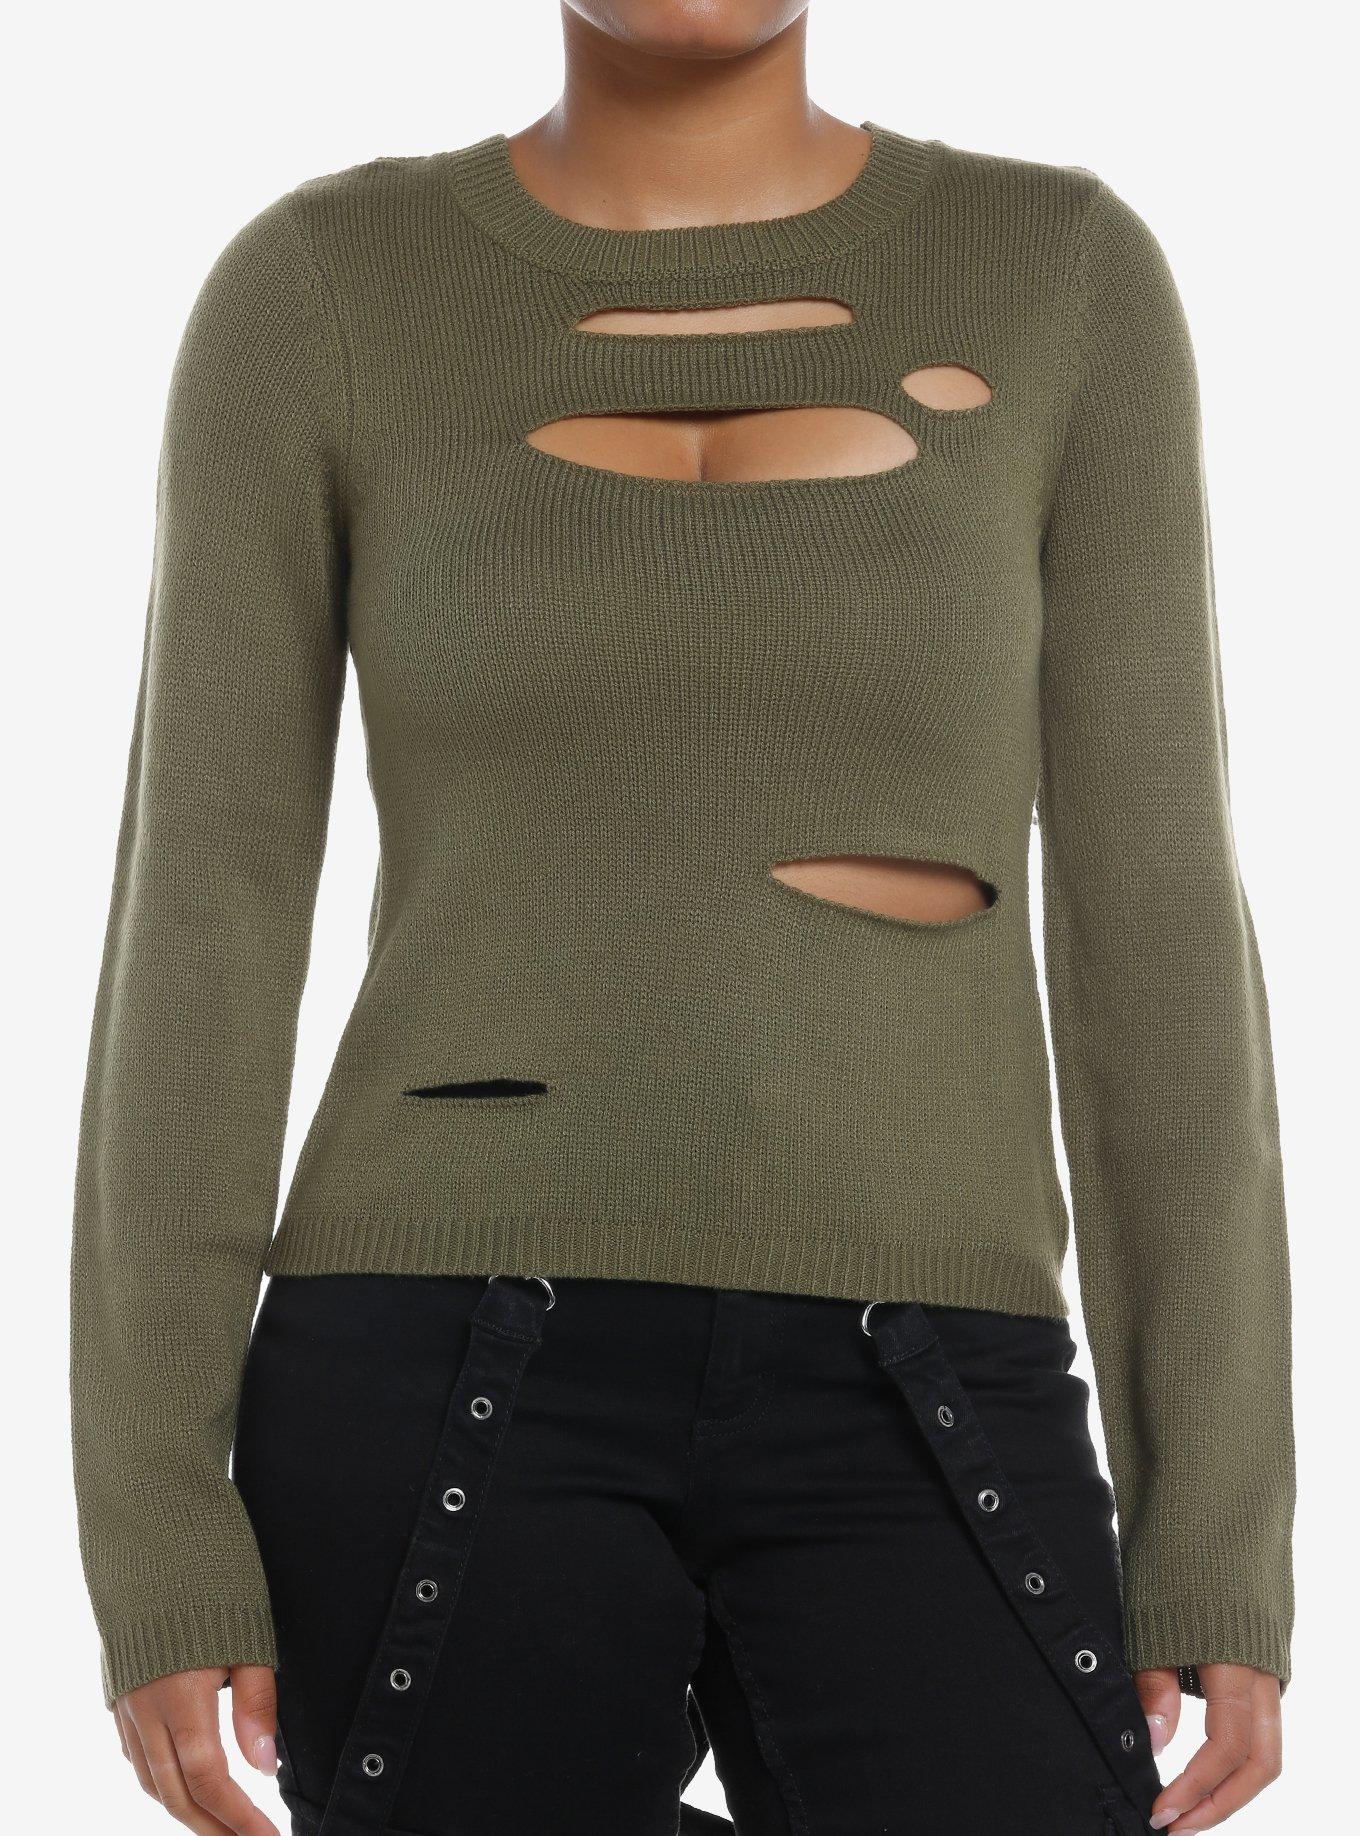 Social Collision Olive Distressed Cutout Girls Sweater, OLIVE, hi-res